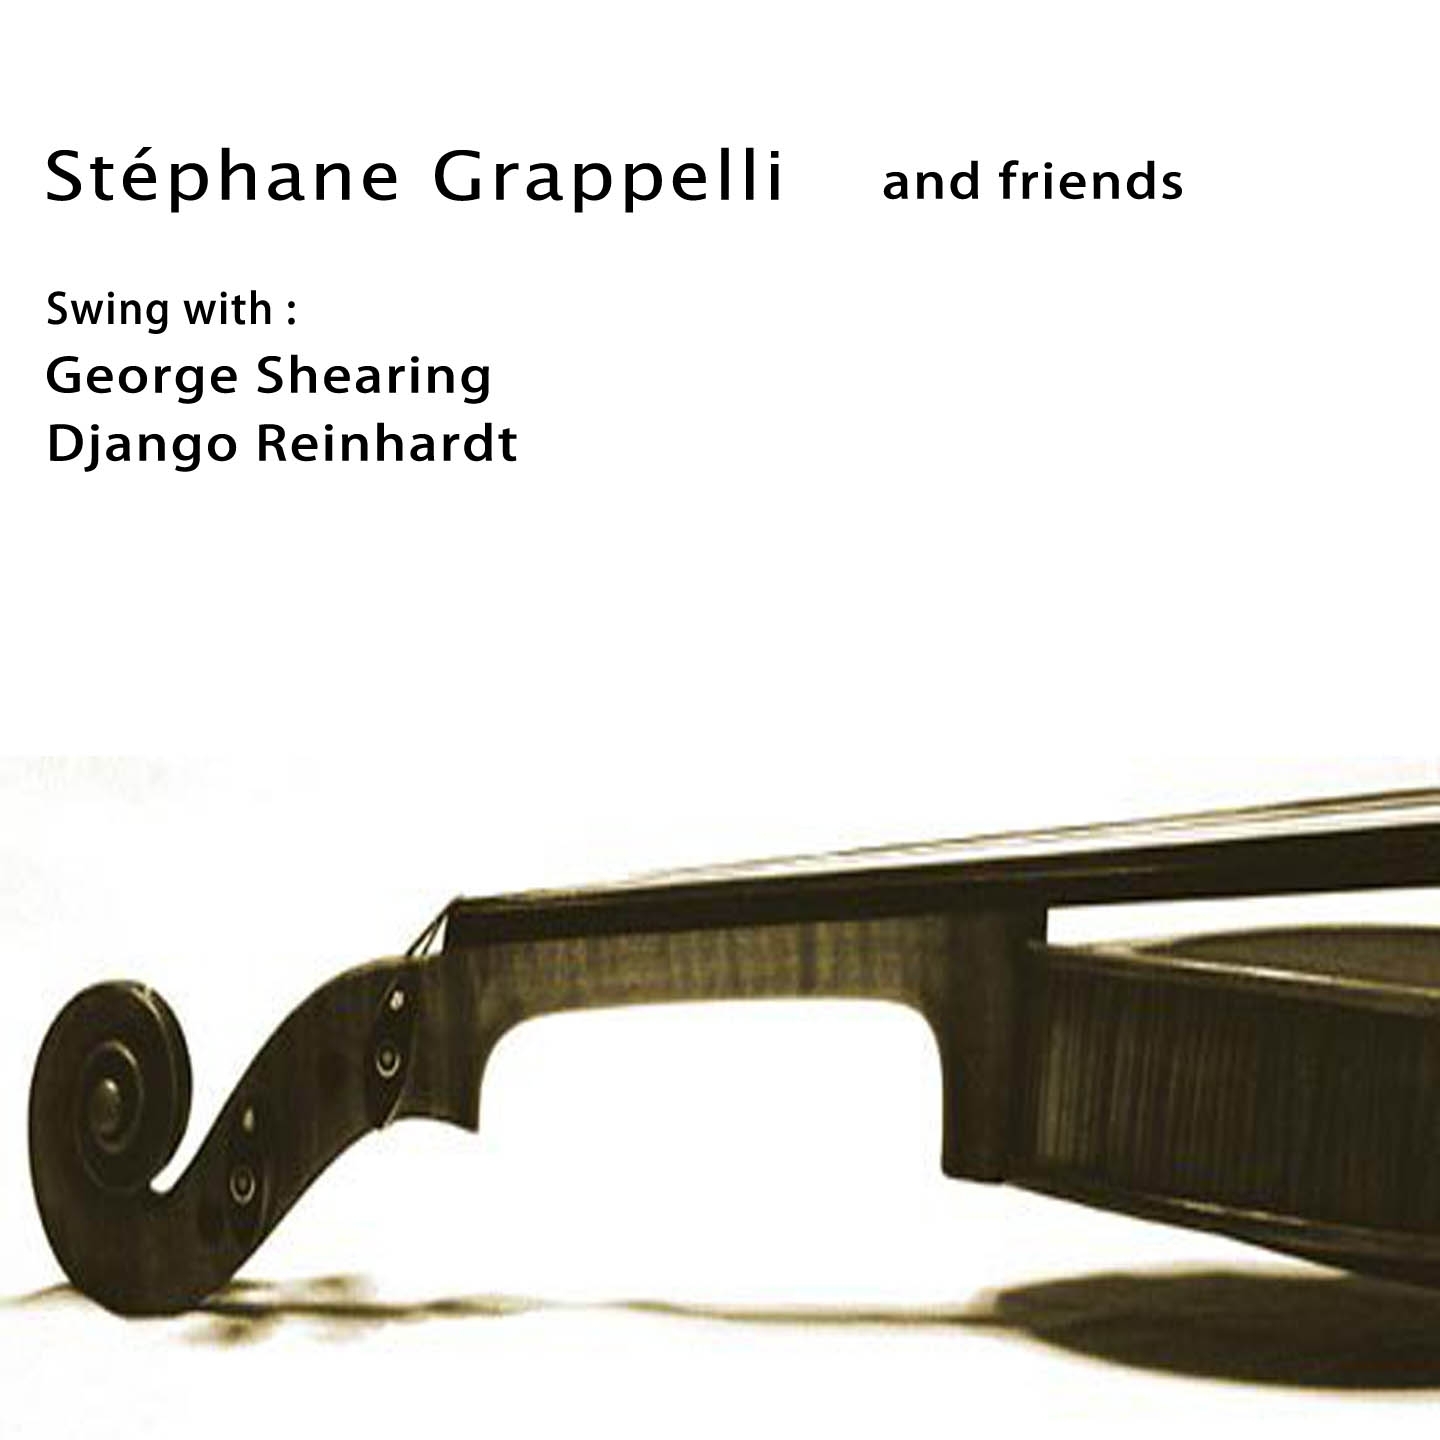 Ste phane Grappelli and Friends